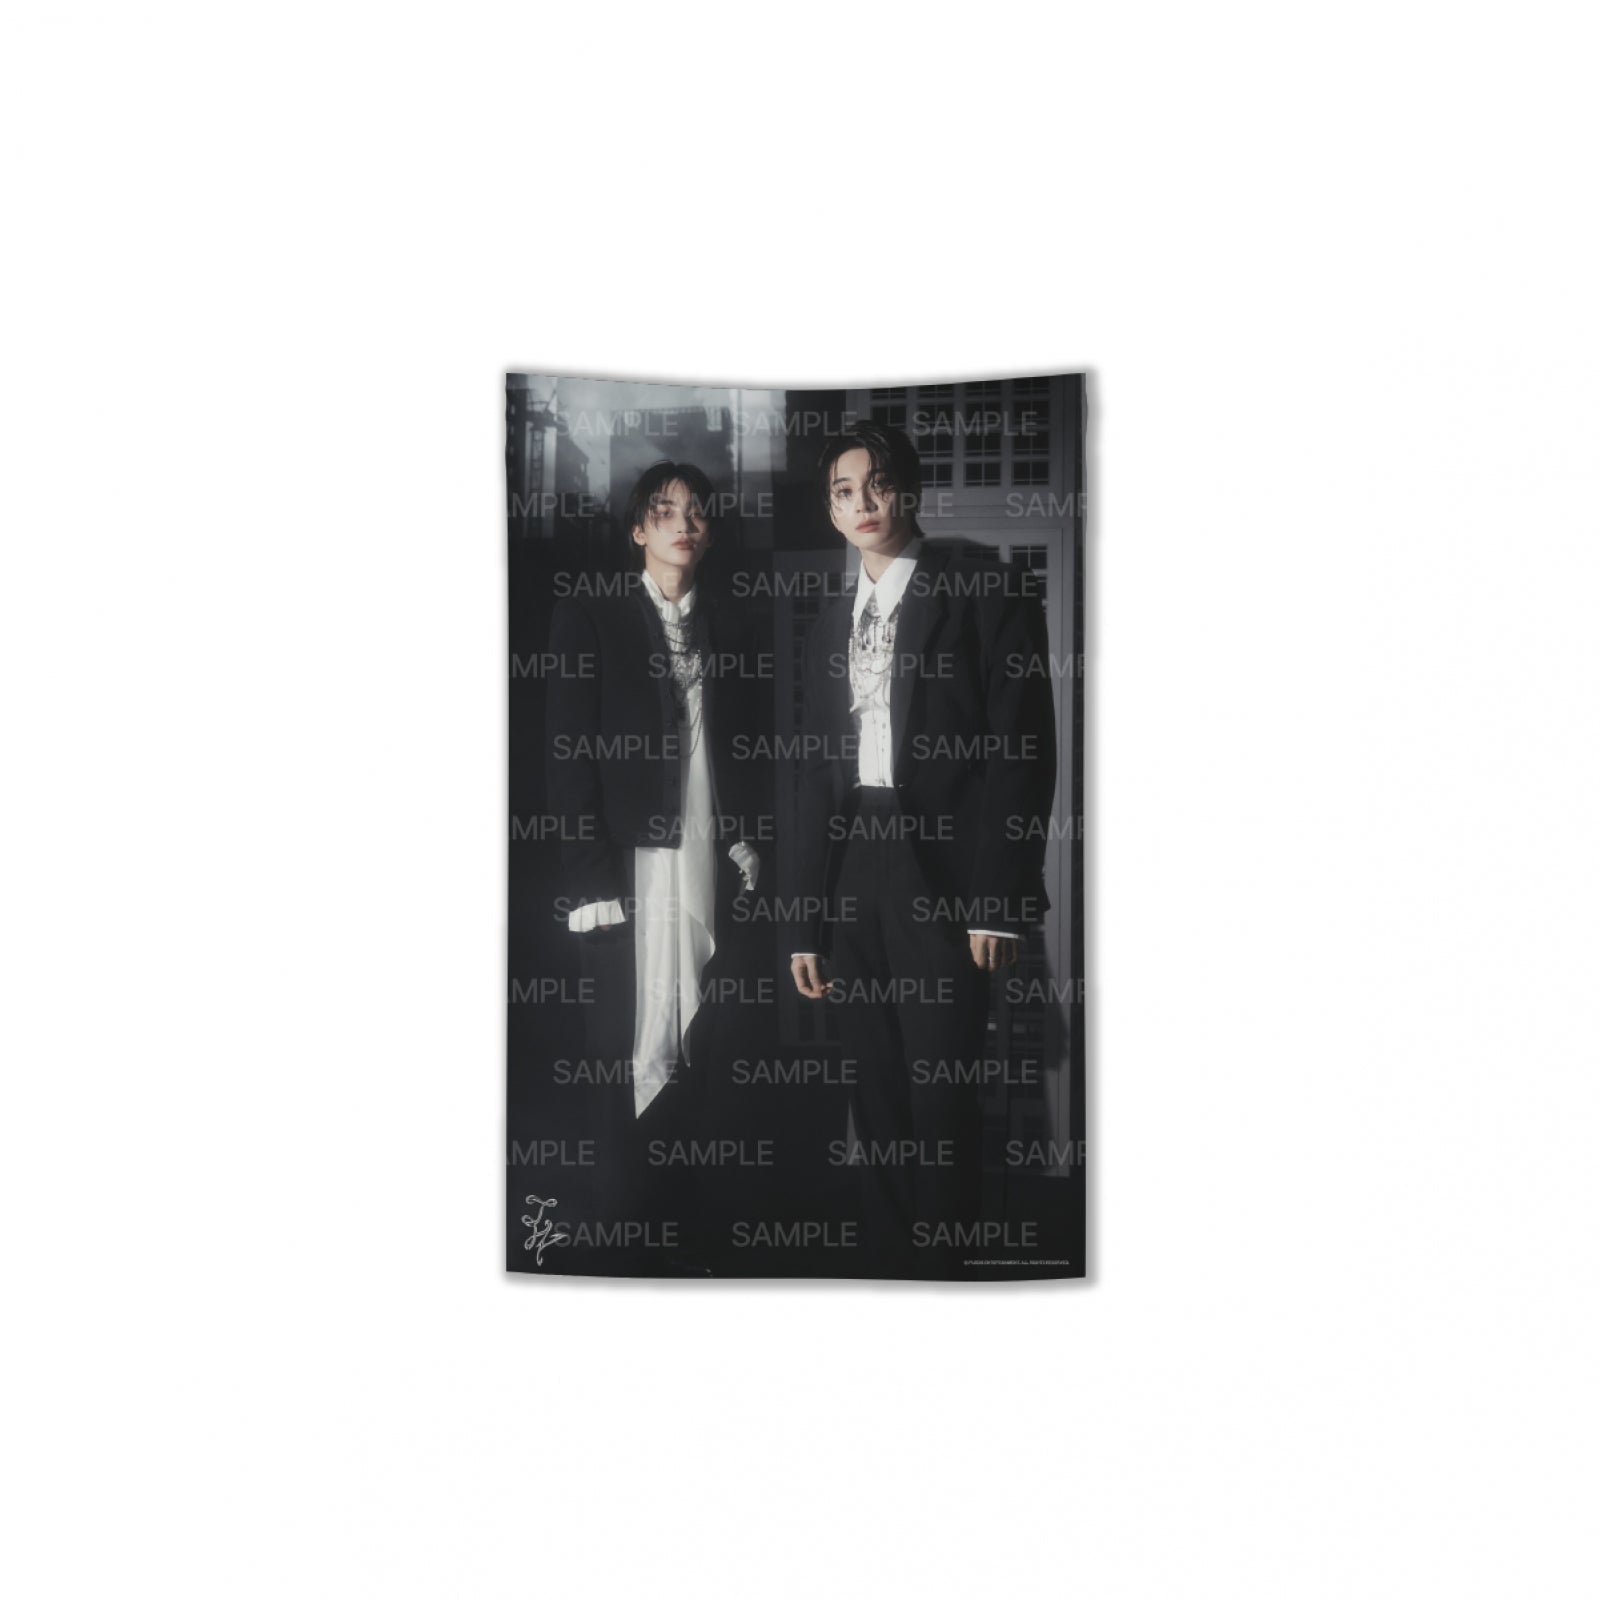 JEONGHAN X WONWOO - THIS MAN 1ST SINGLE ALBUM POP UP OFFICIAL MD CHIFFON POSTER - COKODIVE